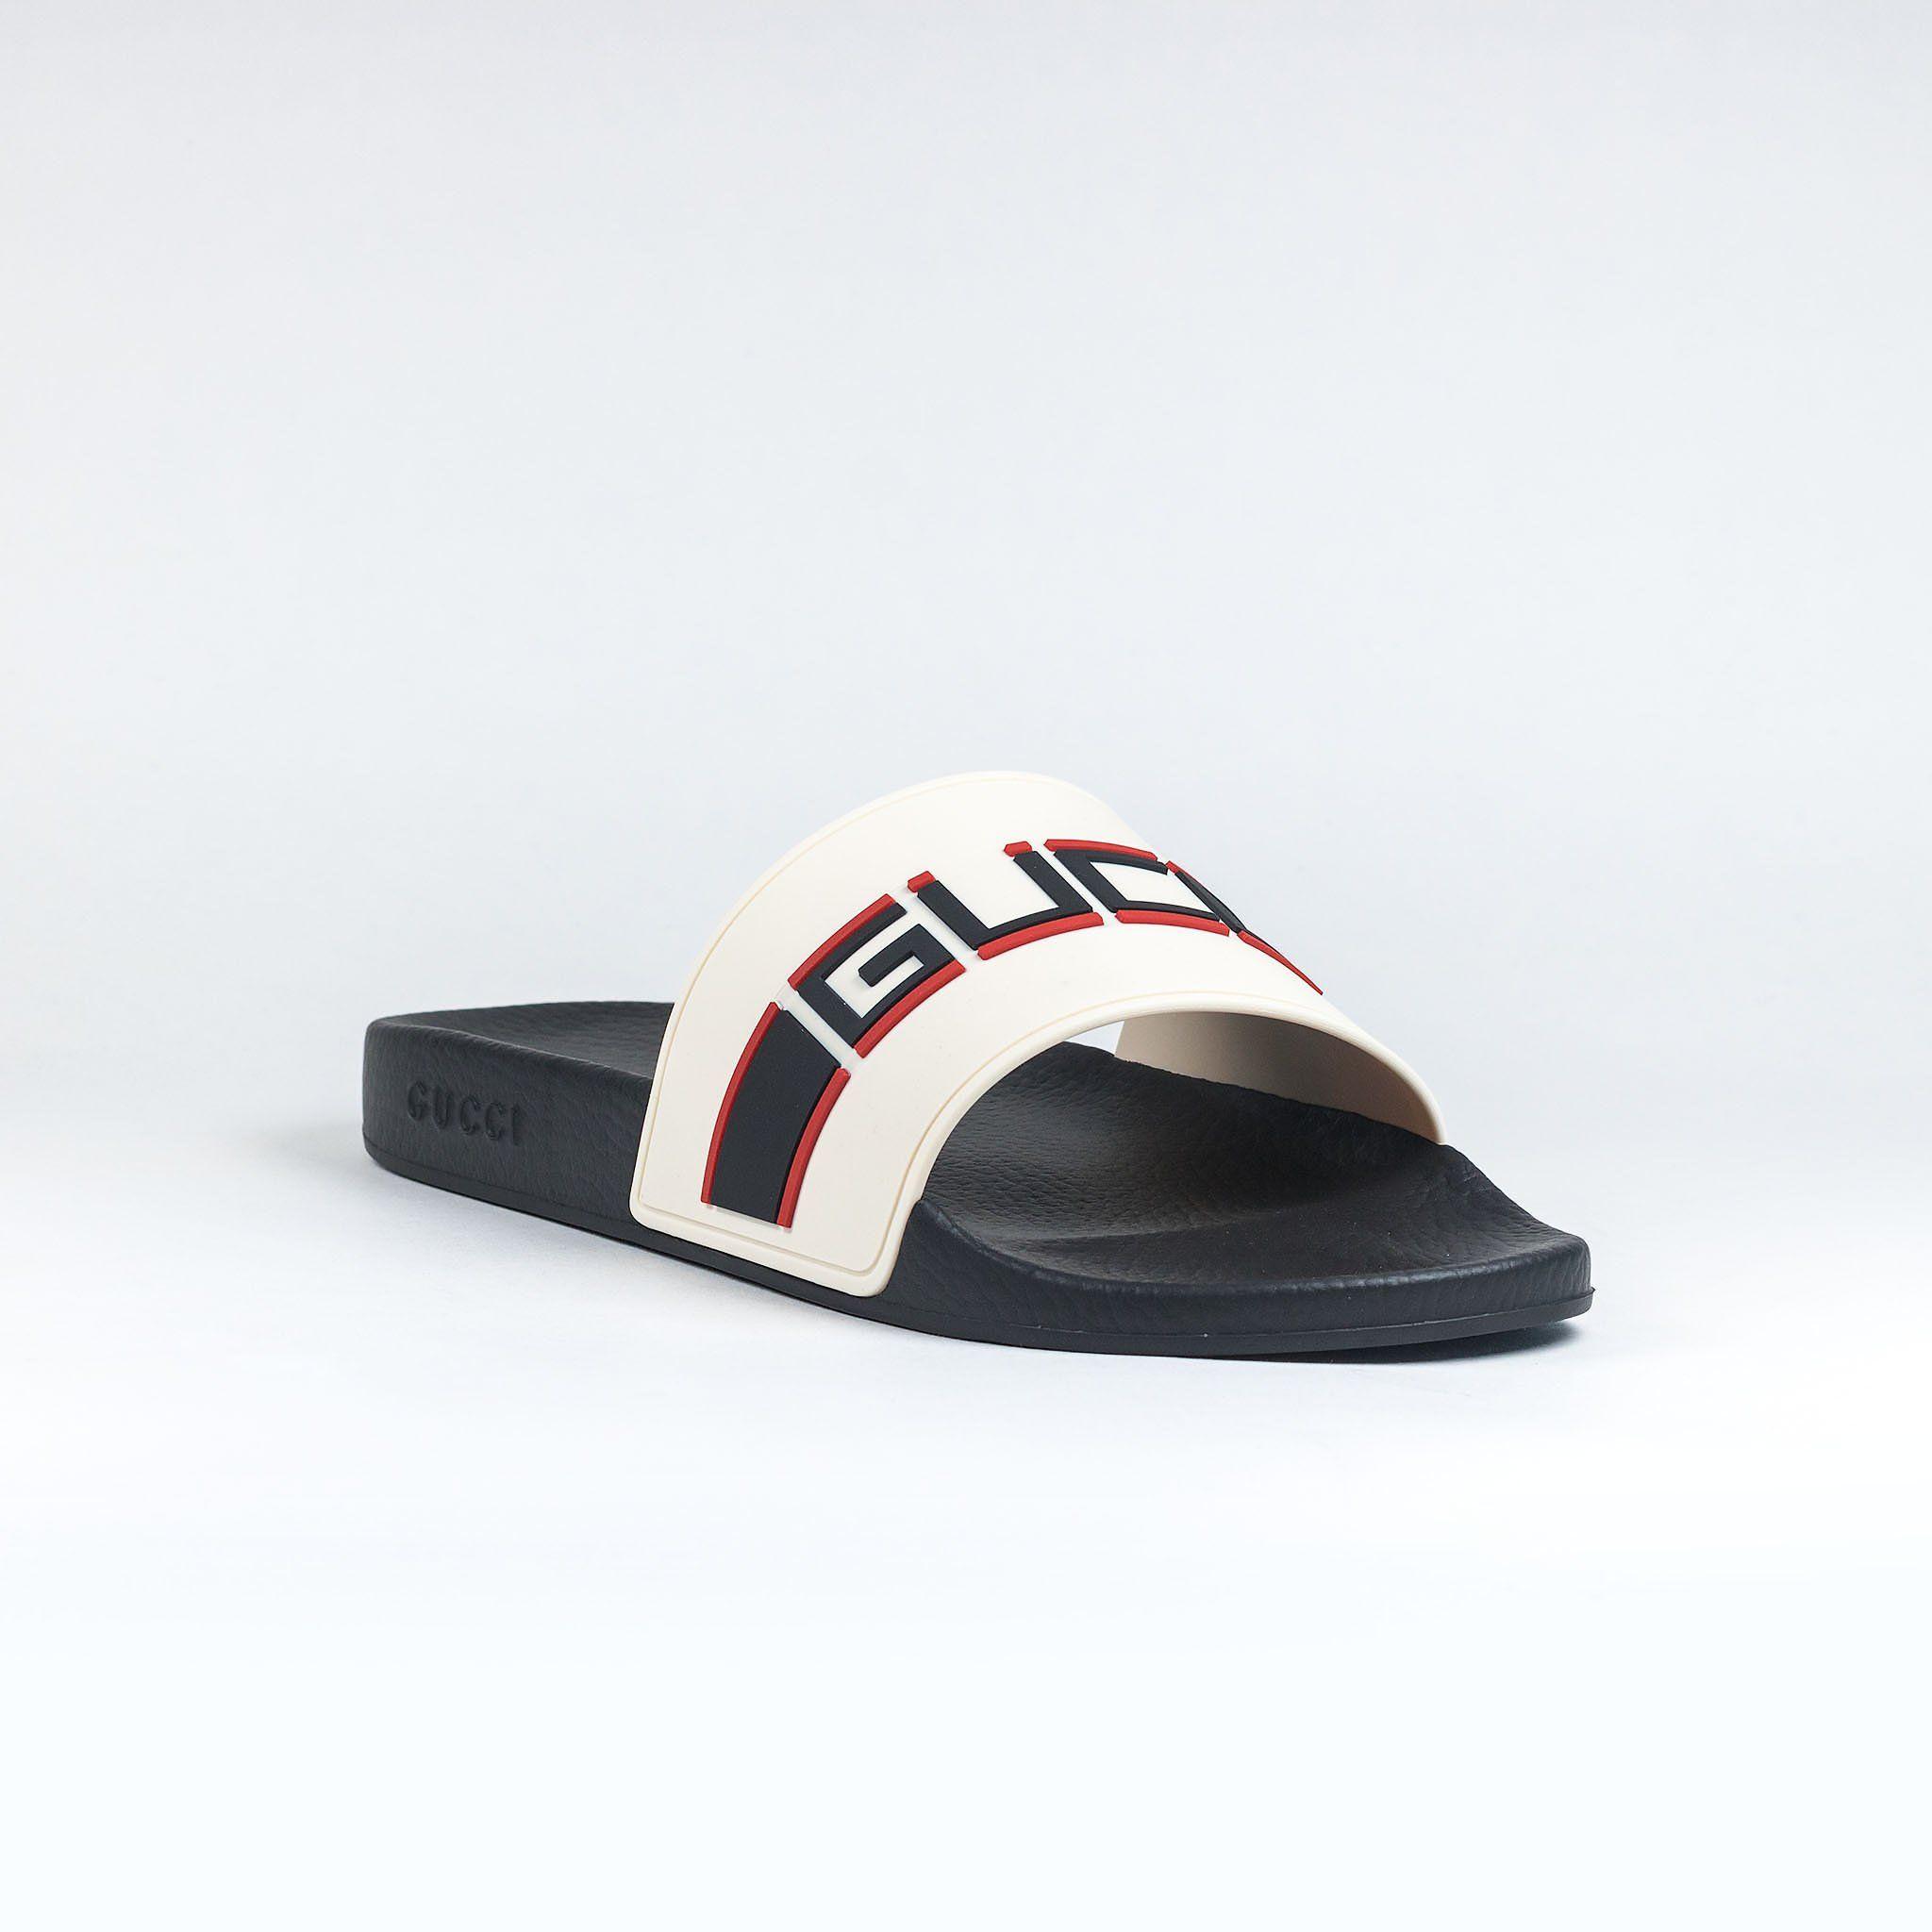 Red and Cream Logo - Gucci Band Logo Pool Slides Cream Black Red